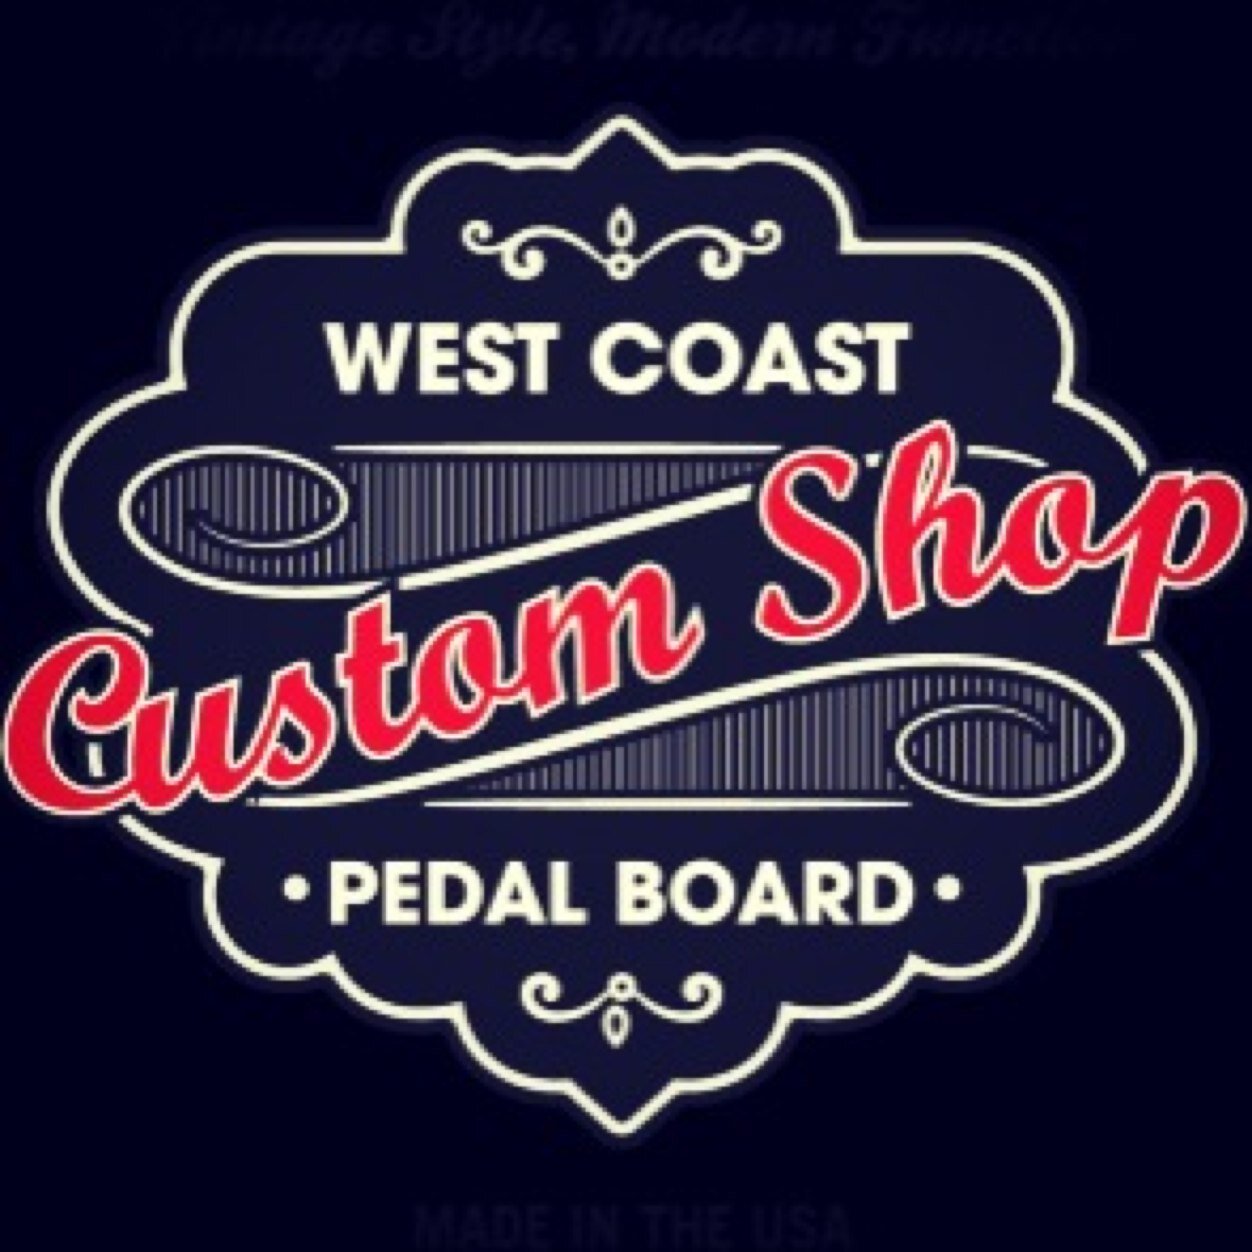 Hand made, for people that like hand made in Northern California pedalboard gear.